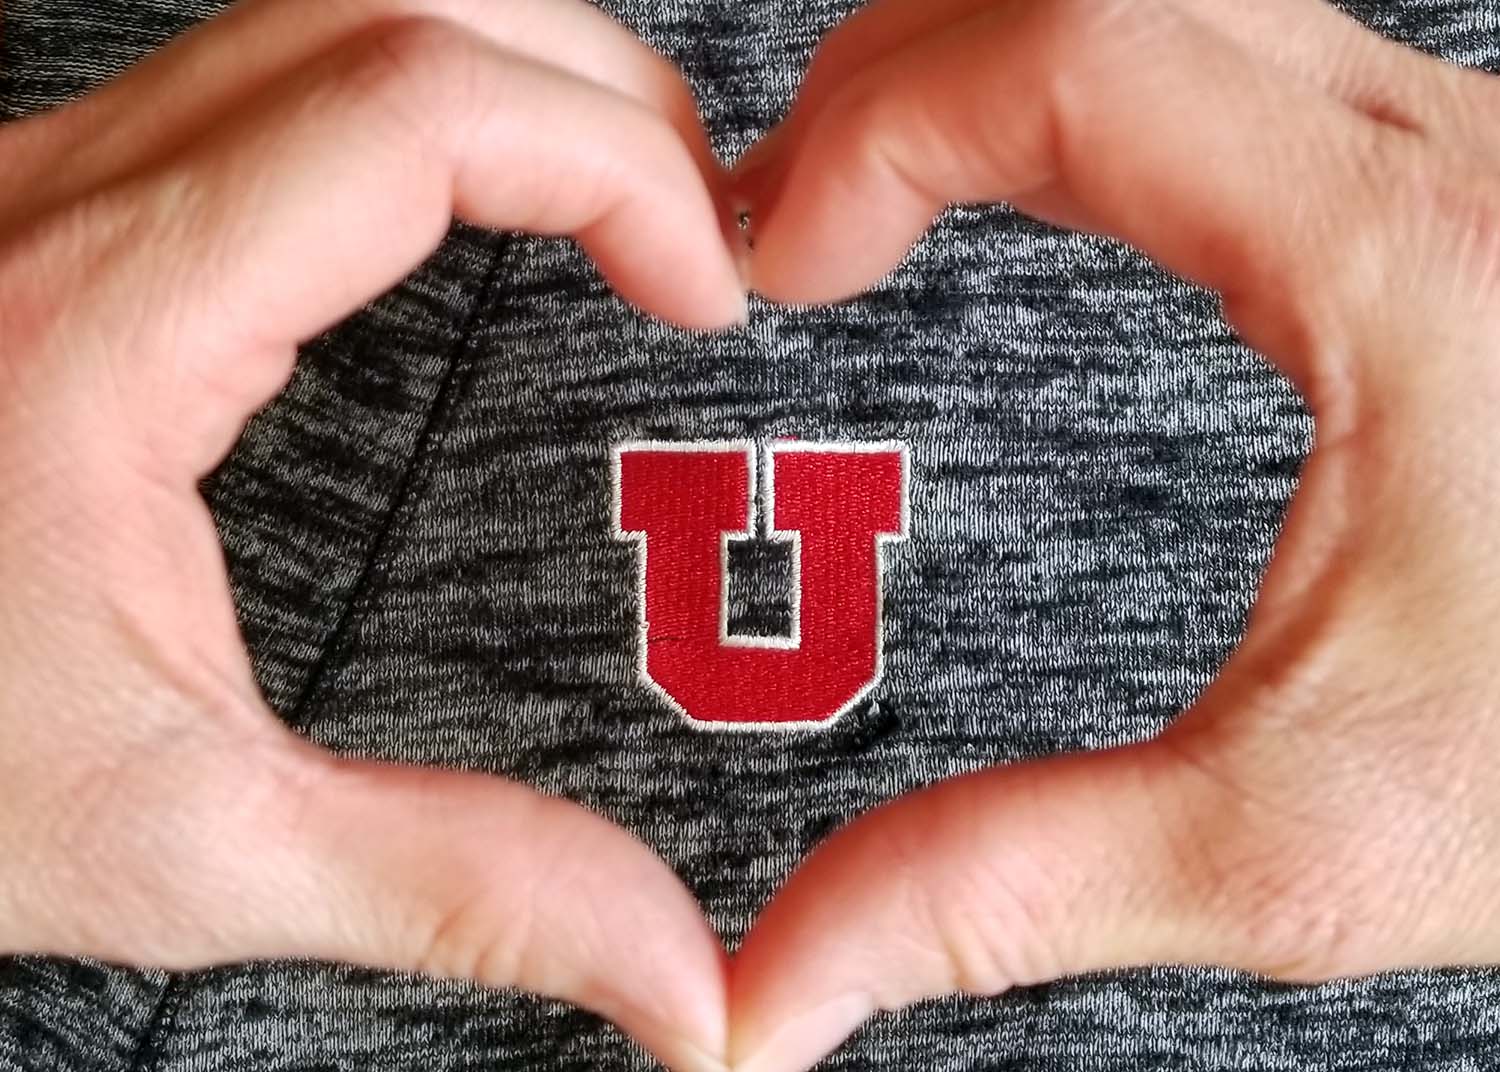 Two hands making a heart around the block U logo